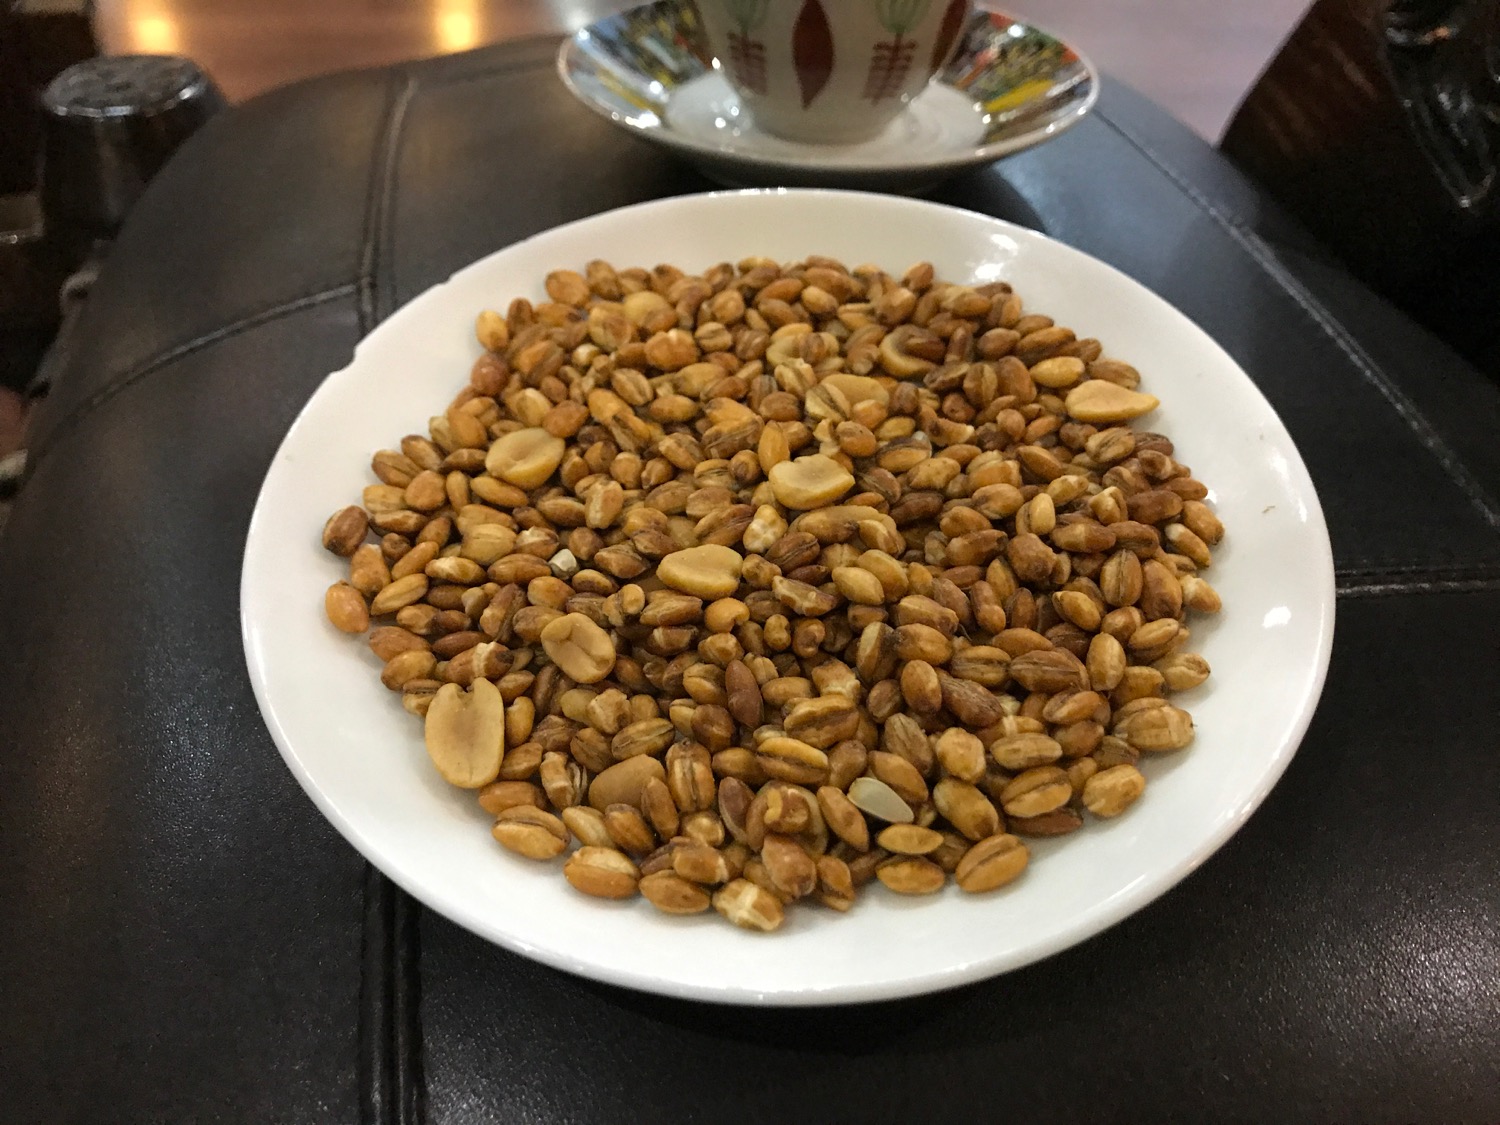 a plate of peanuts on a black surface